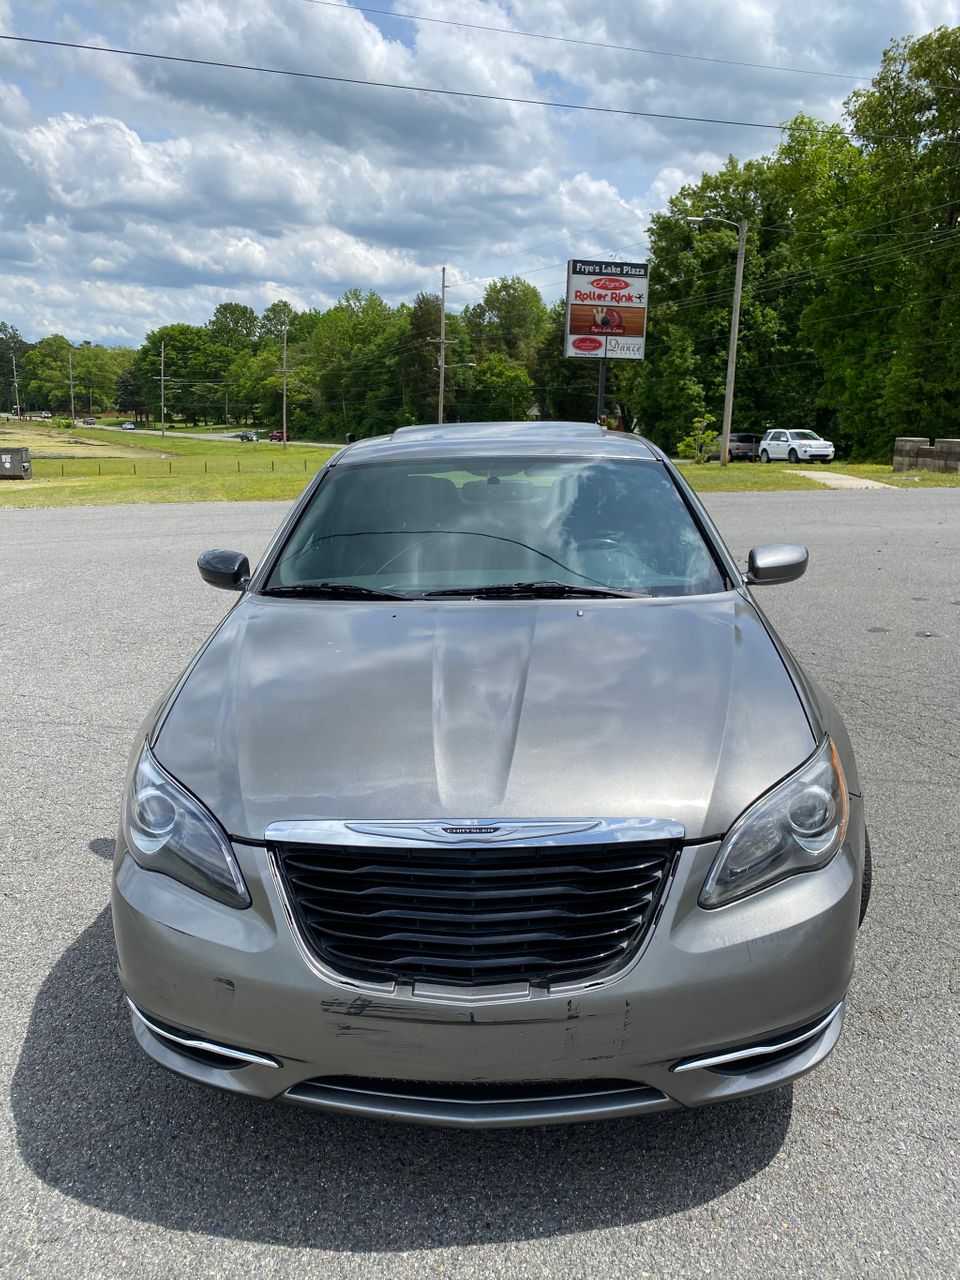 2012 Chrysler 200 Touring | Concord, NC, Tungsten Metallic Clear Coat (Gray), Front Wheel